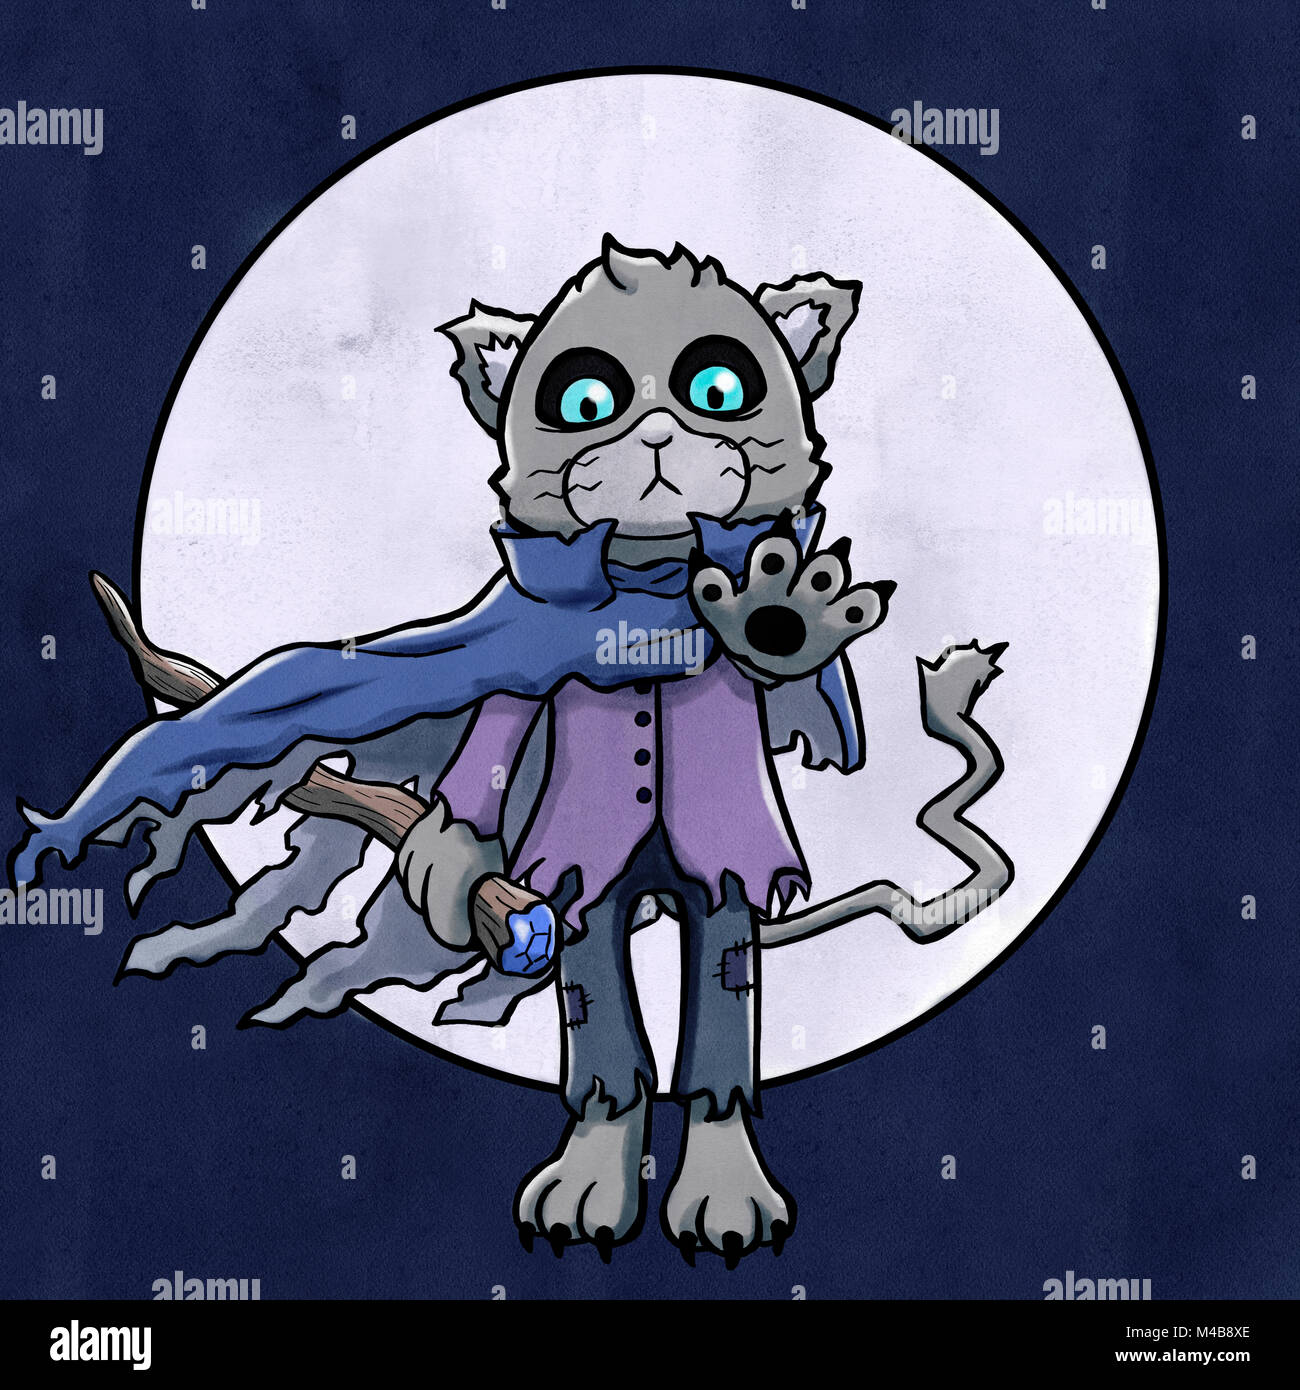 Sinister sorcerer cat flying with moon in background Stock Photo